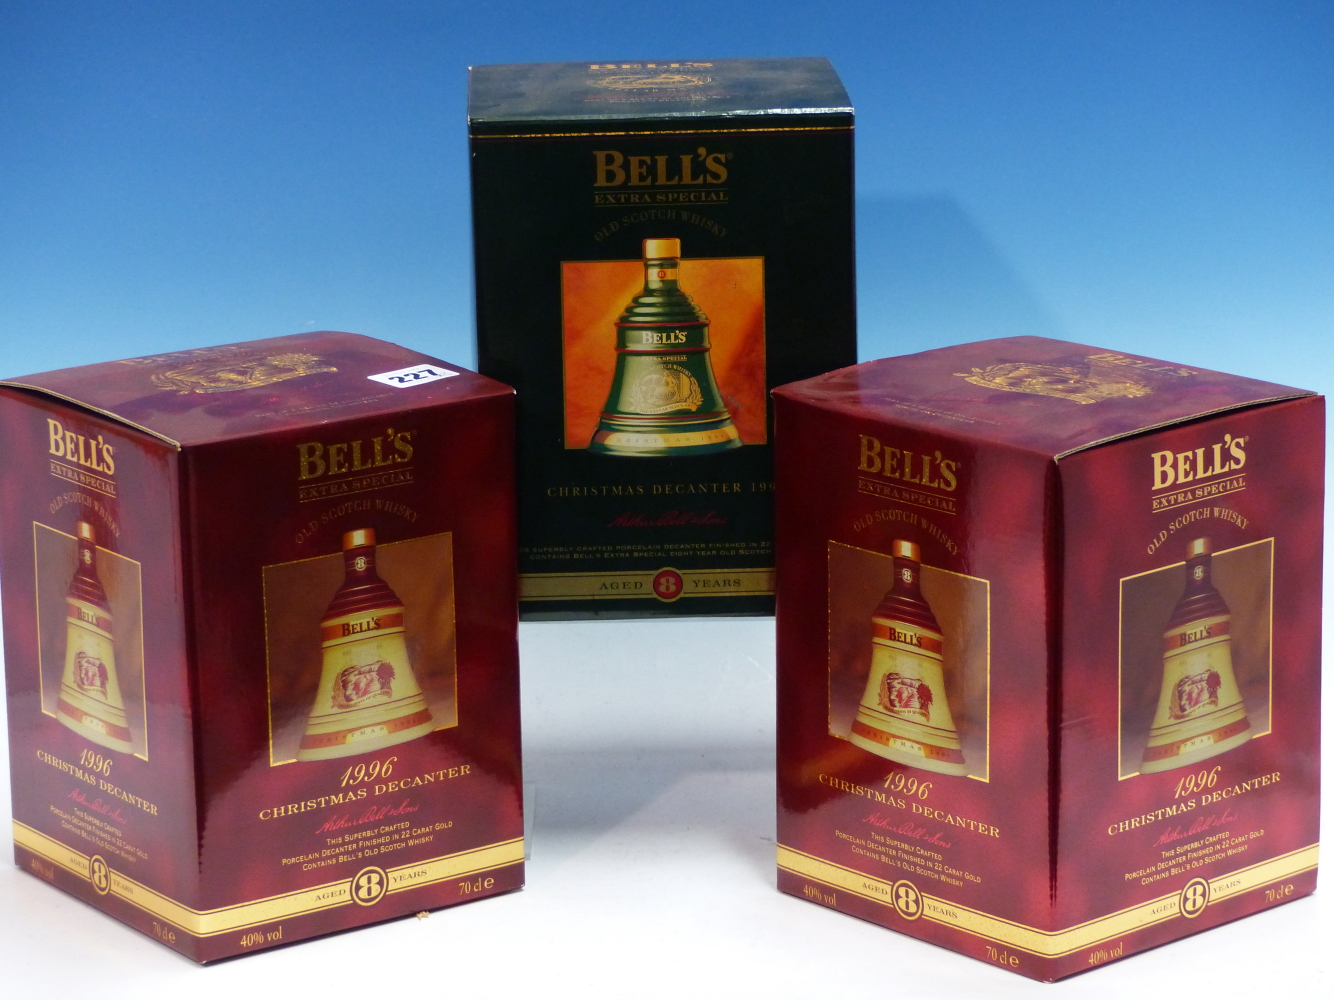 WHISKY. BELLS CHRISTMAS DECANTER 1996 EDITION, 2 x BOTTLES, BOXED TOGETHER WITH 1995, 1 x BOTTLE,